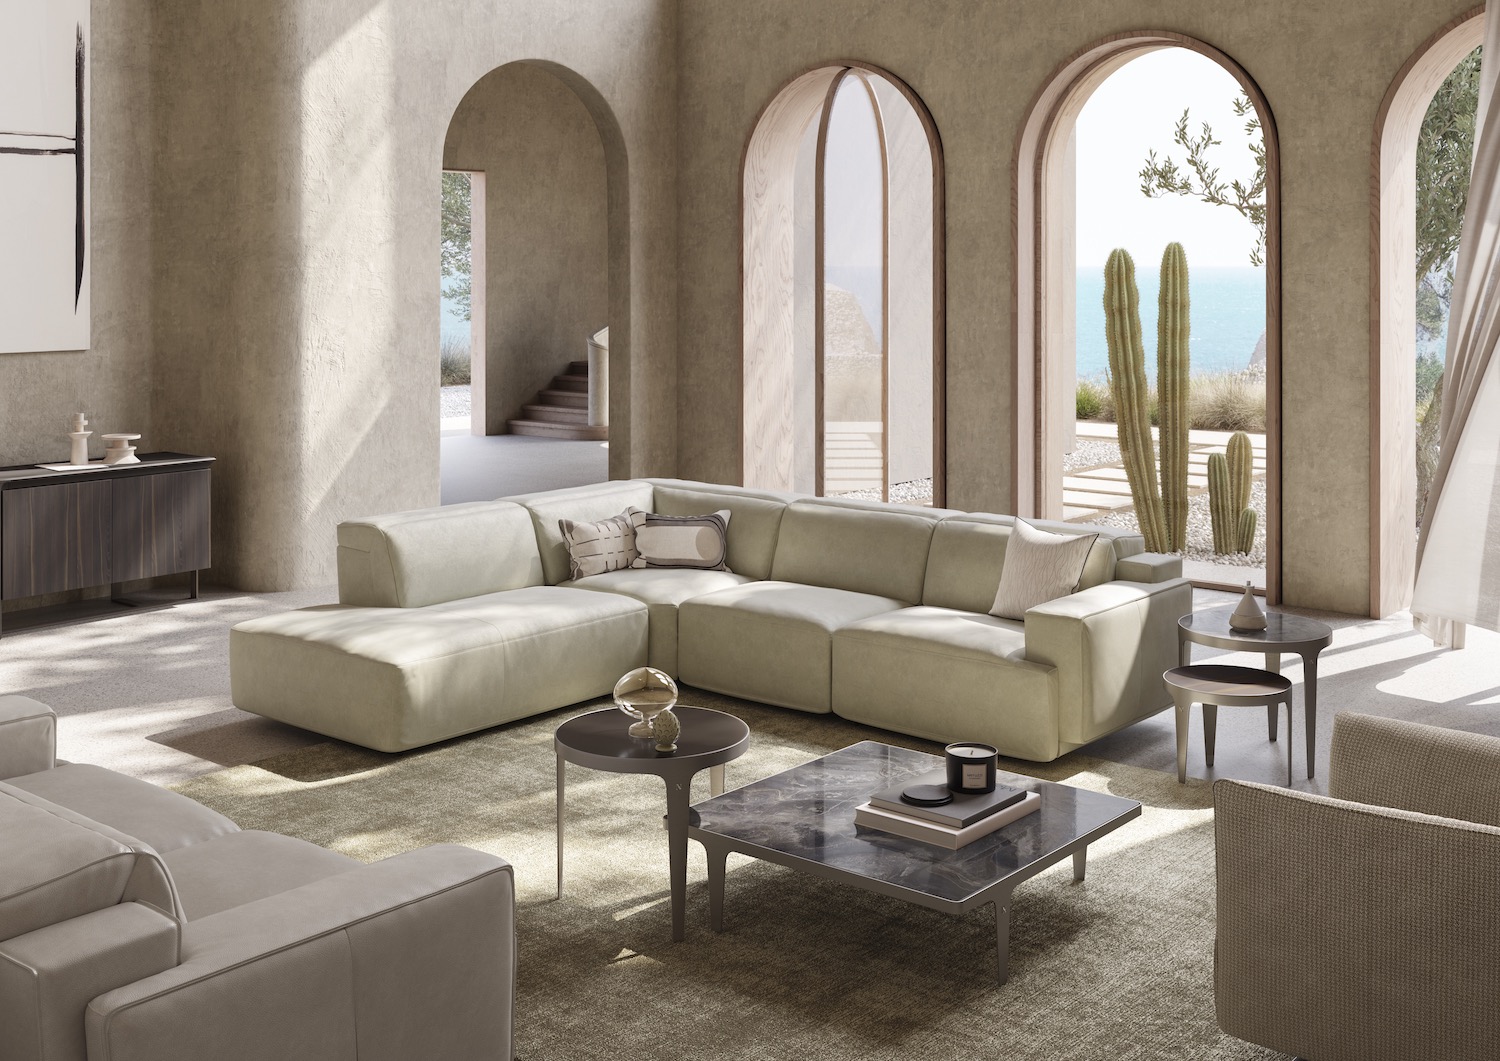 Trending San Diego product Natuzzi Italian couch in desert style living room